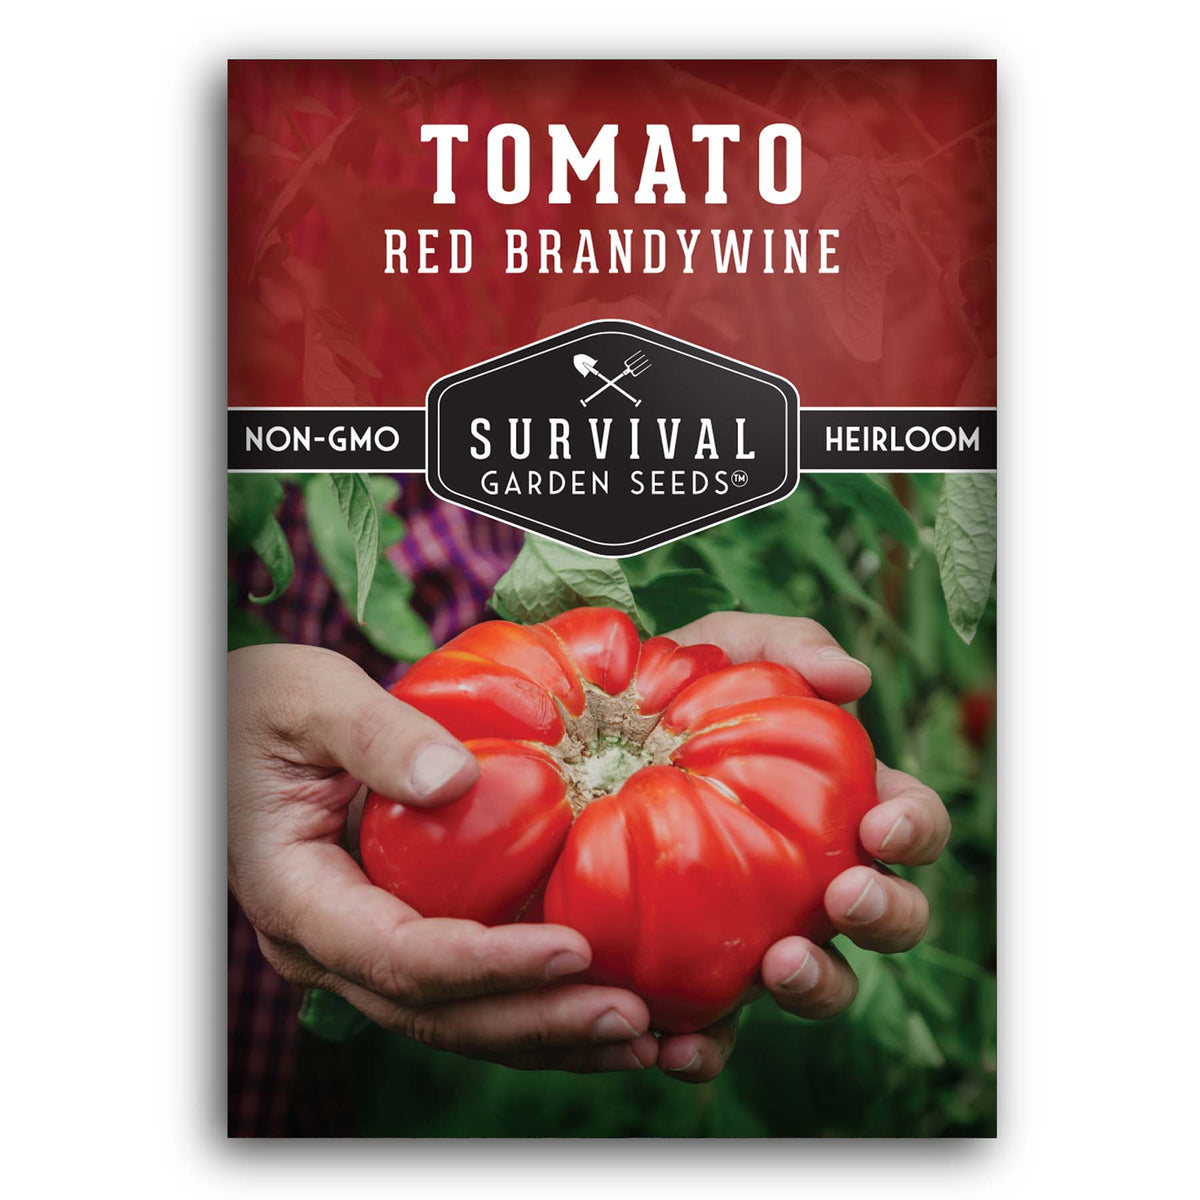 Brandywine Red Tomato heirloom seeds for planting